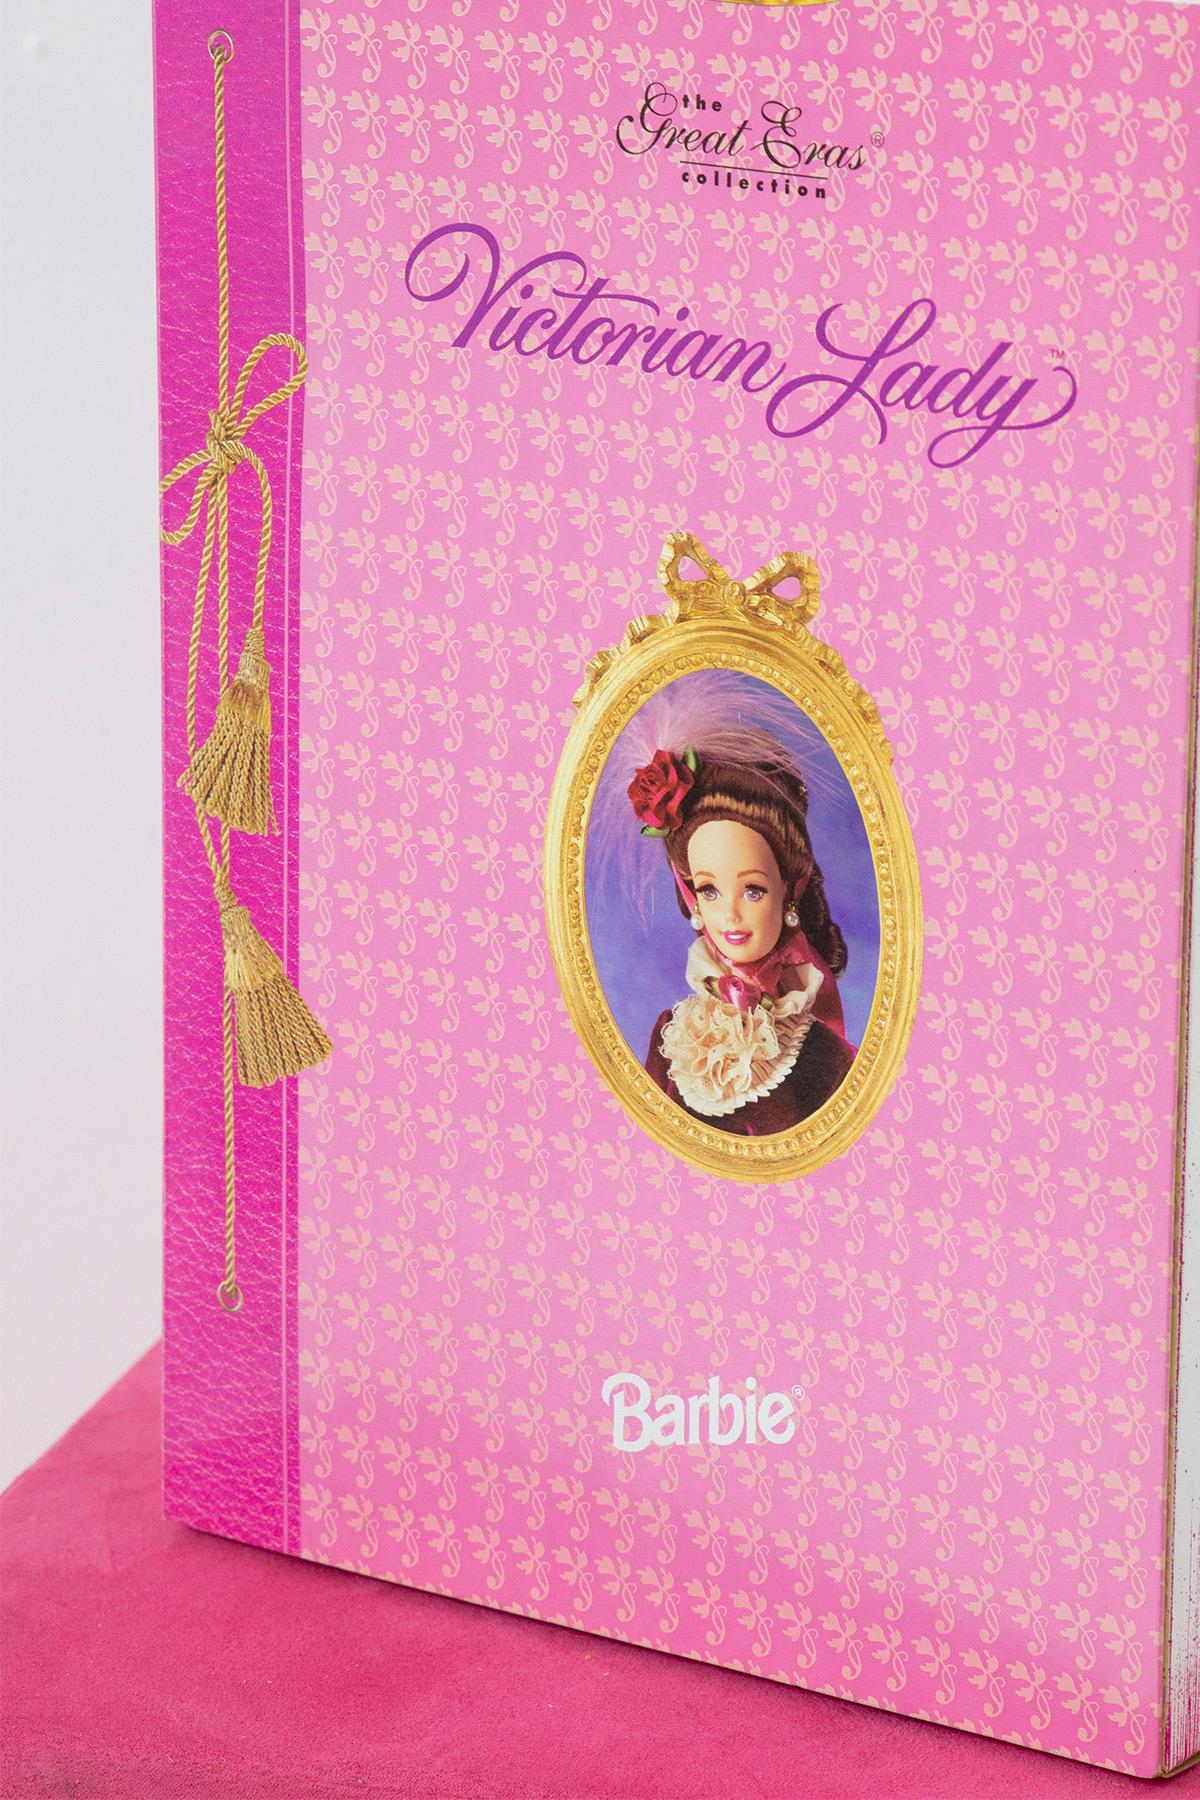 Modern Mattel The Great Eras Collection Barbie Victorian Lady 1996 For Sale